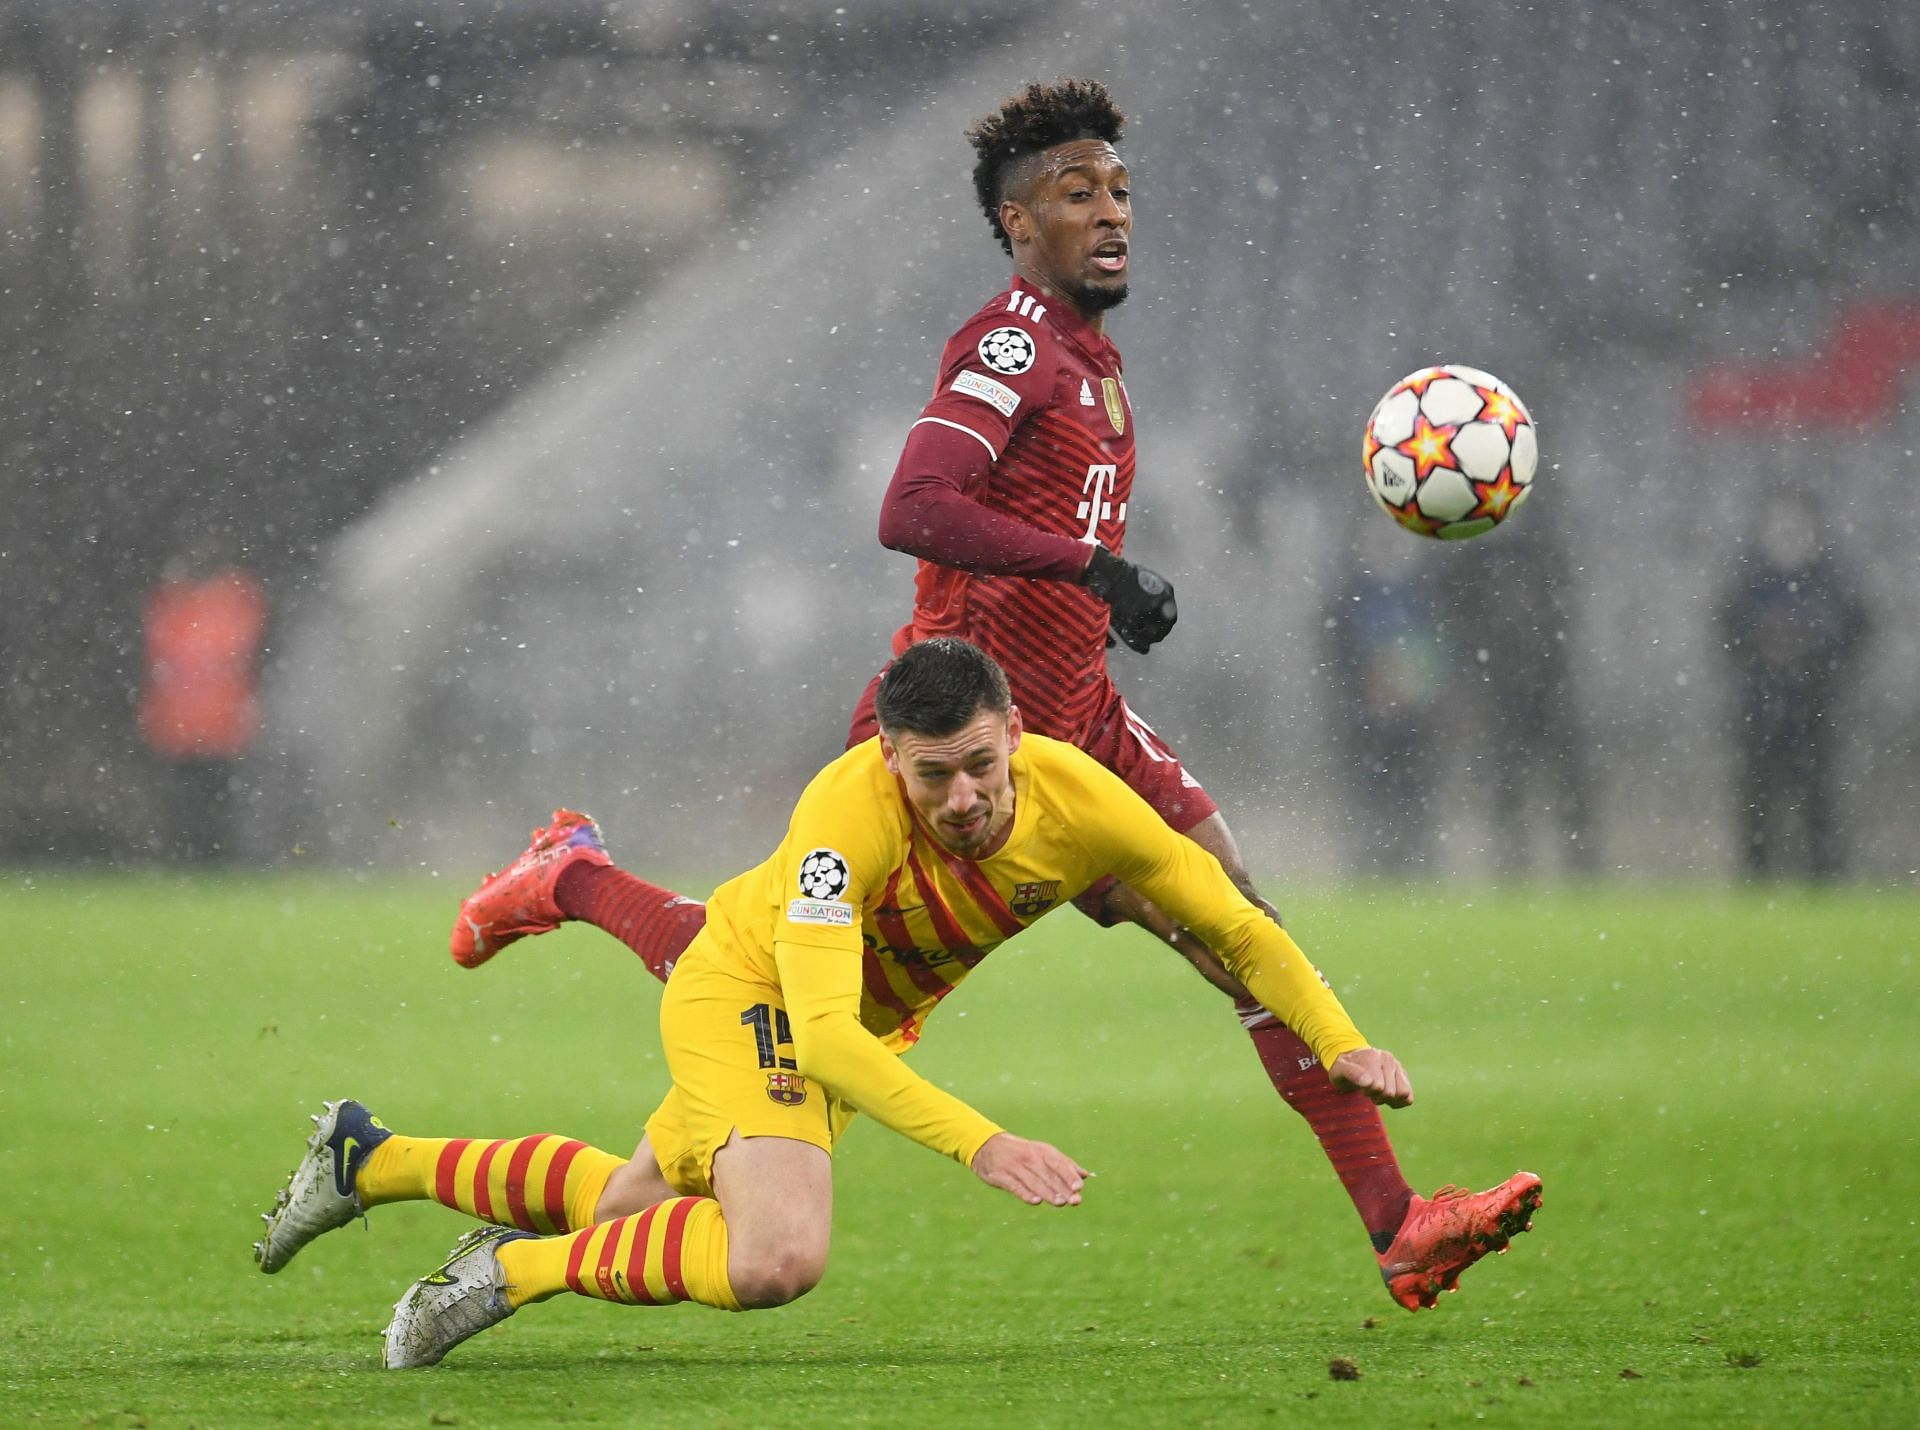 Kingley Coman took Barcelona to the cleaners to help Bayern Munich to a comfortable win.